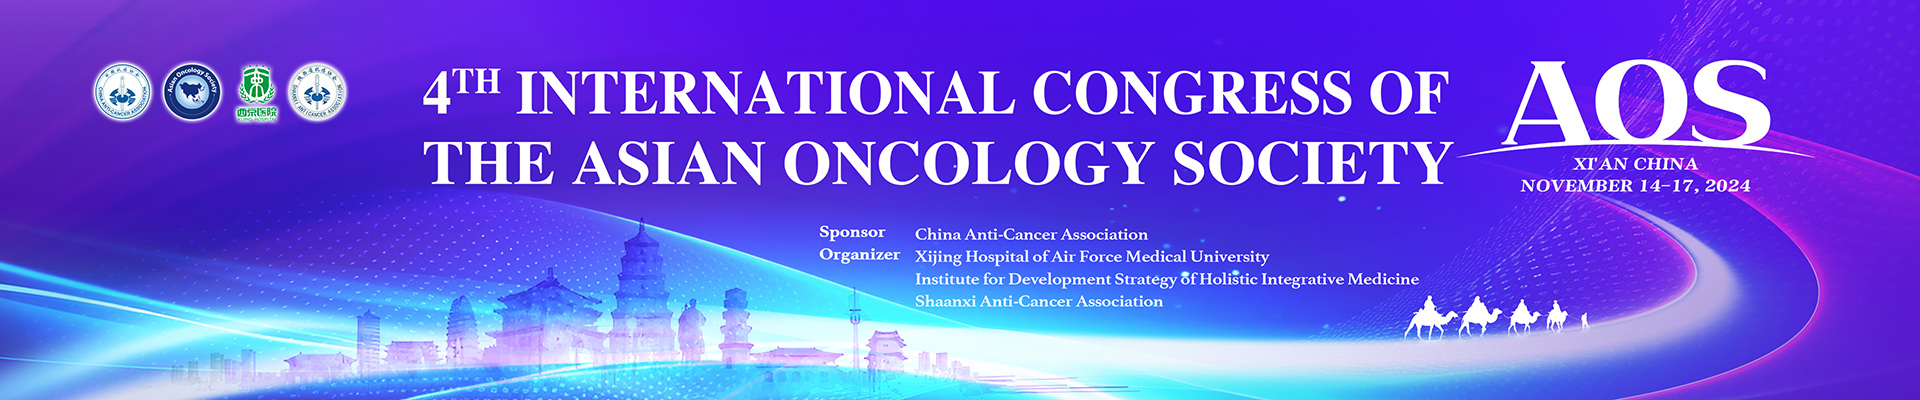 4TH INTERNATIONAL CONGRESS OF THE ASIAN ONCOLOGY SOCIETY 2024--2024AOS